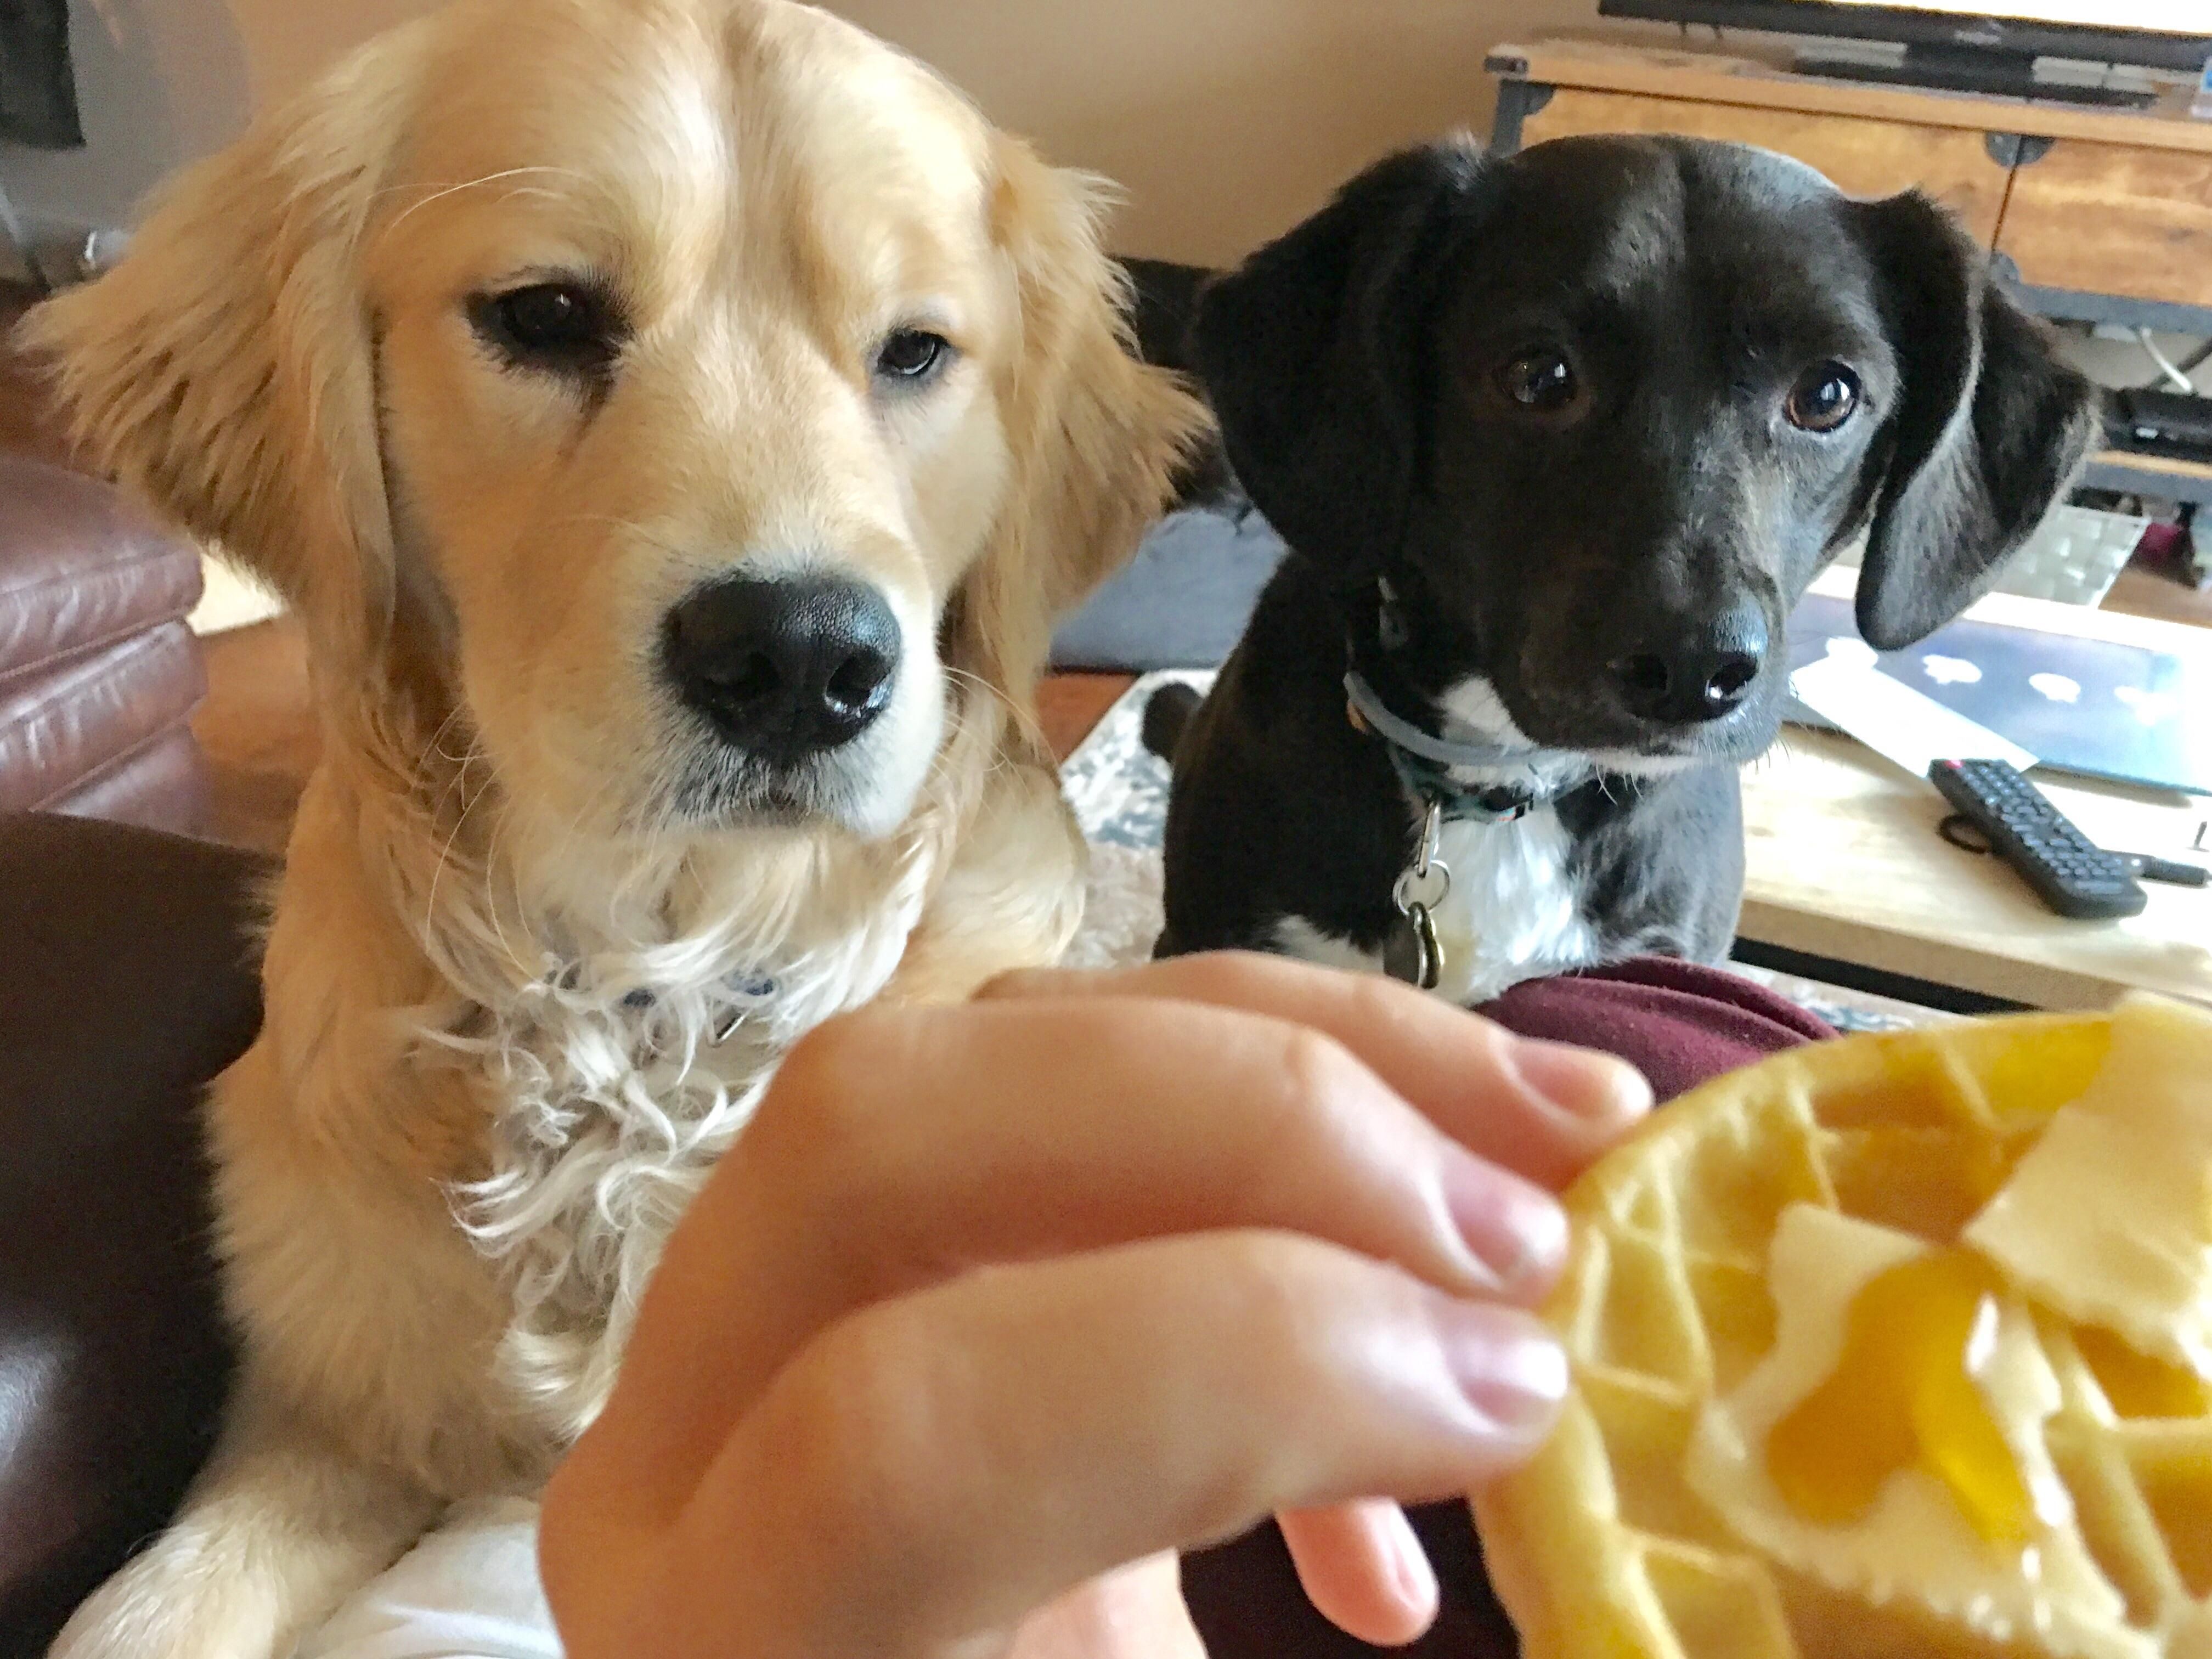 That waffle looks really dangerous. I think you should let us handle that for you.